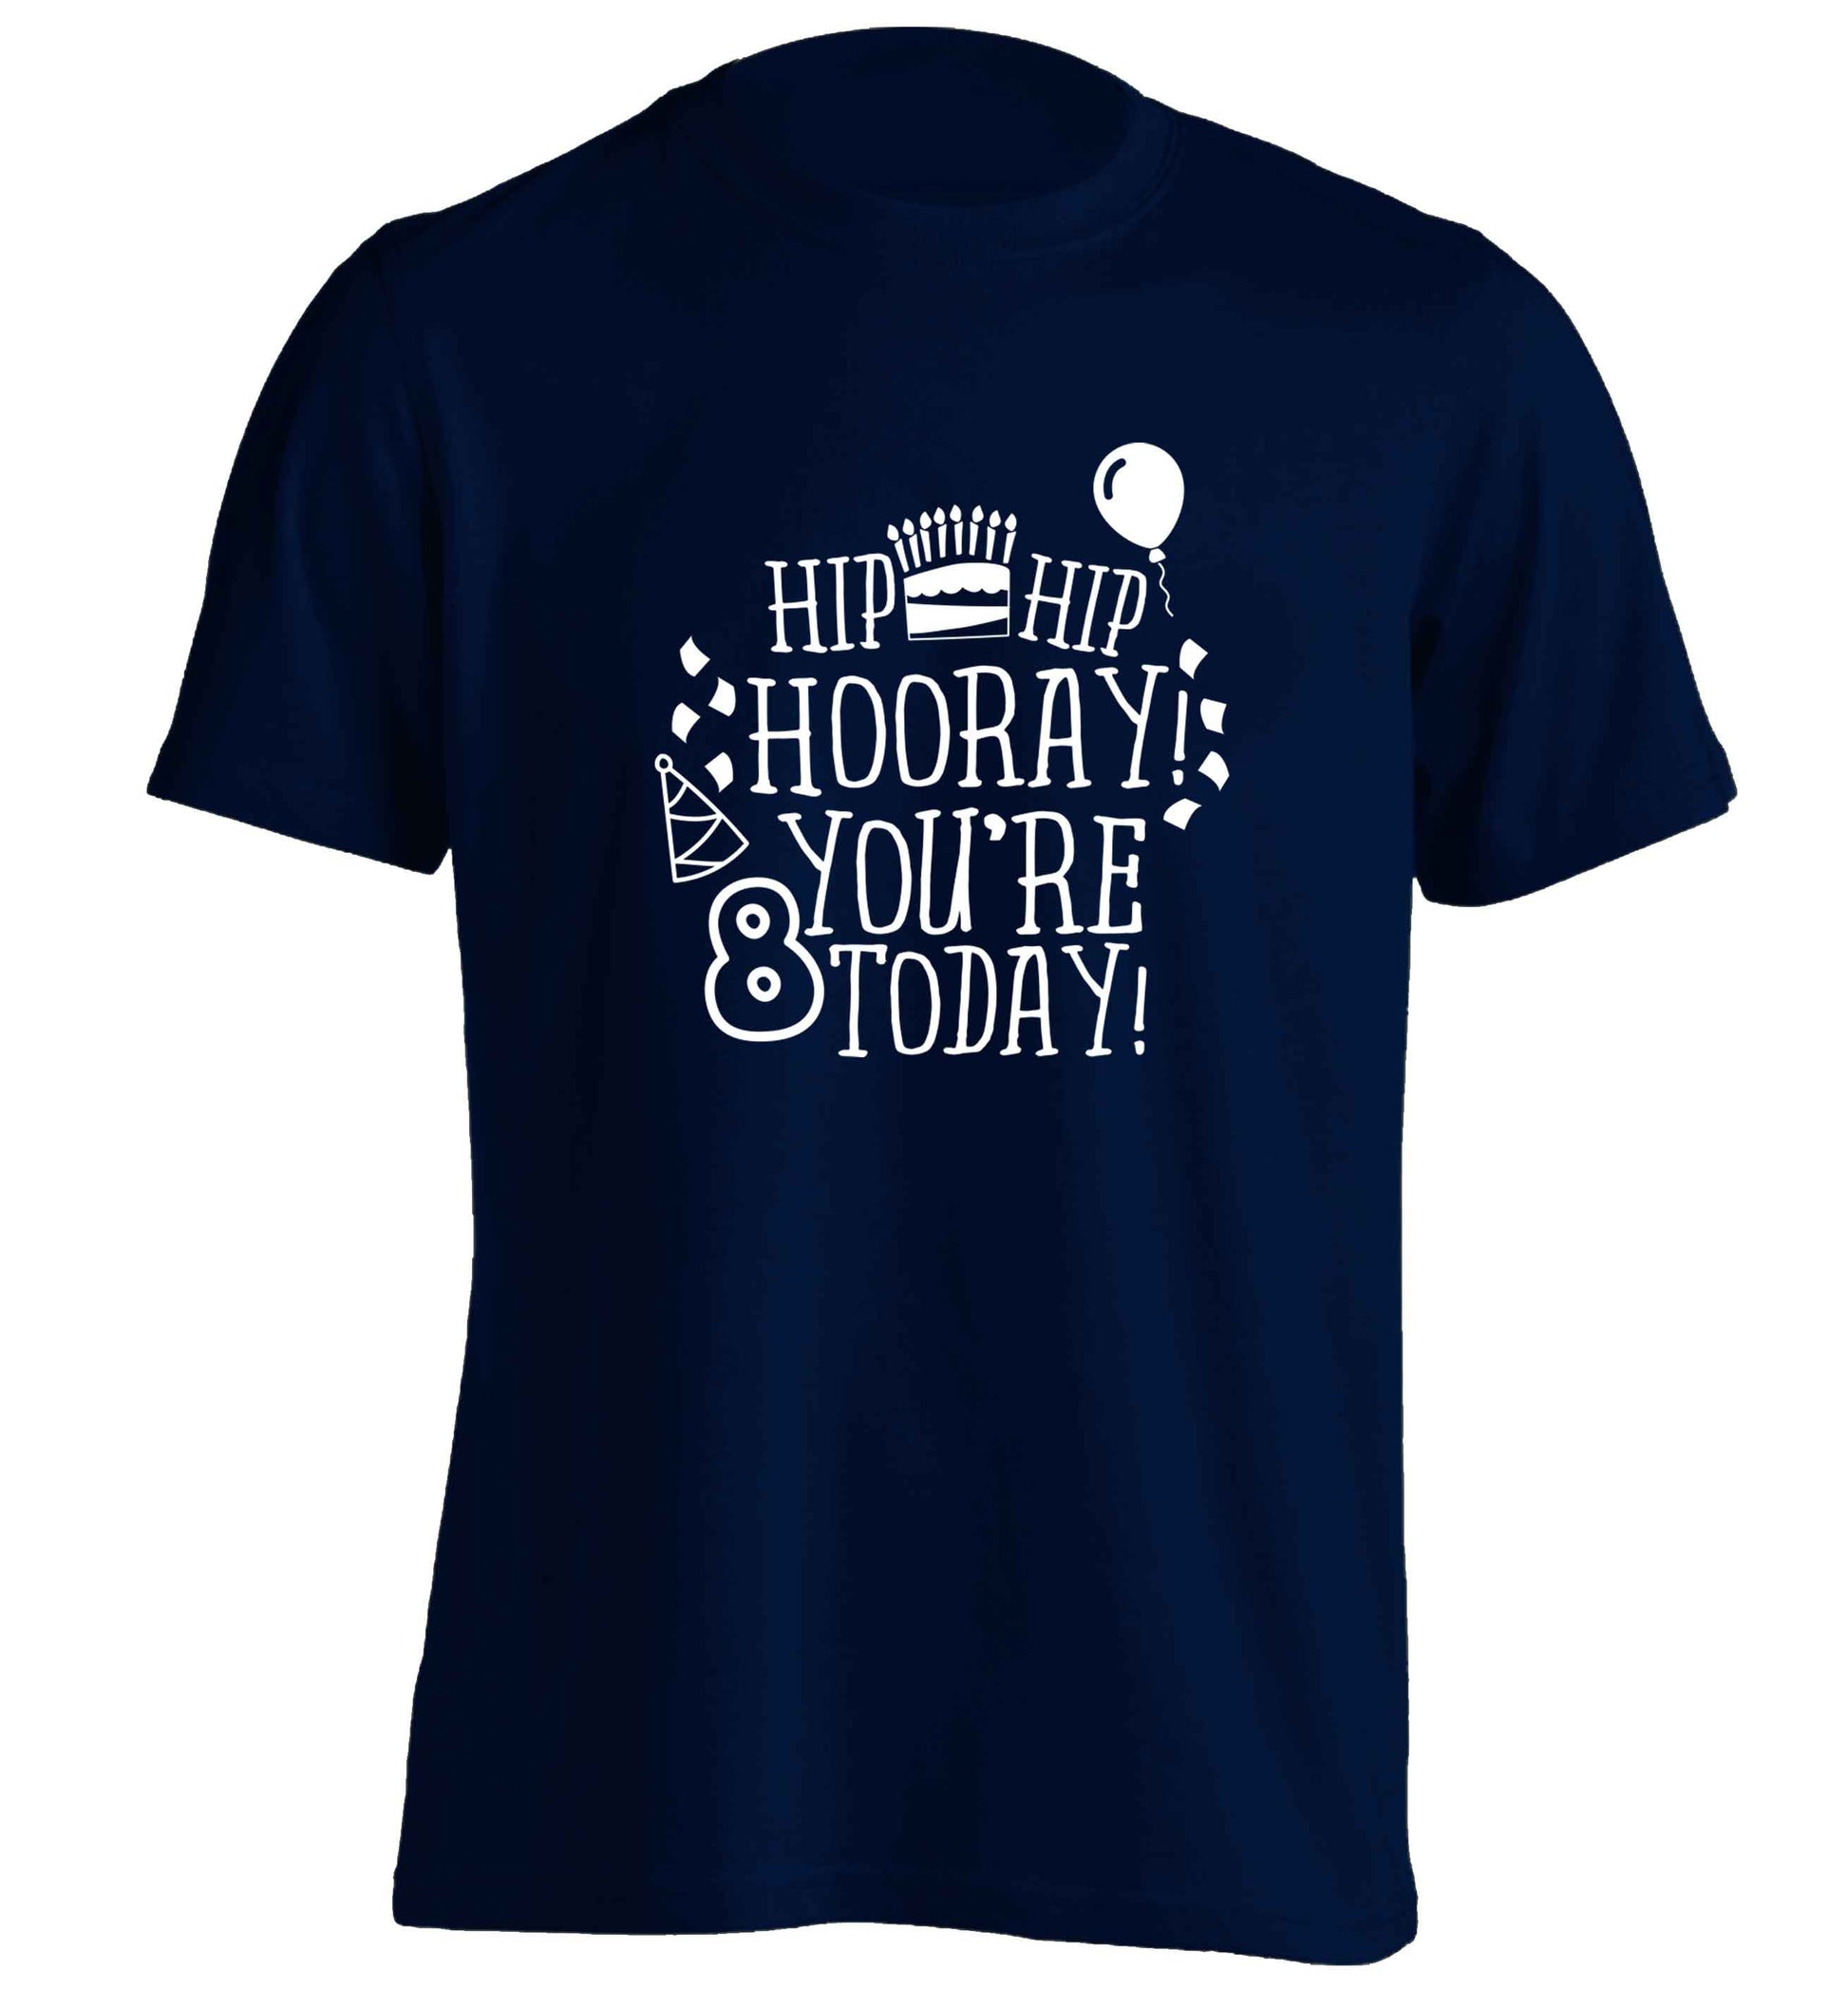 Hip hip hooray you're 8 today! adults unisex navy Tshirt 2XL